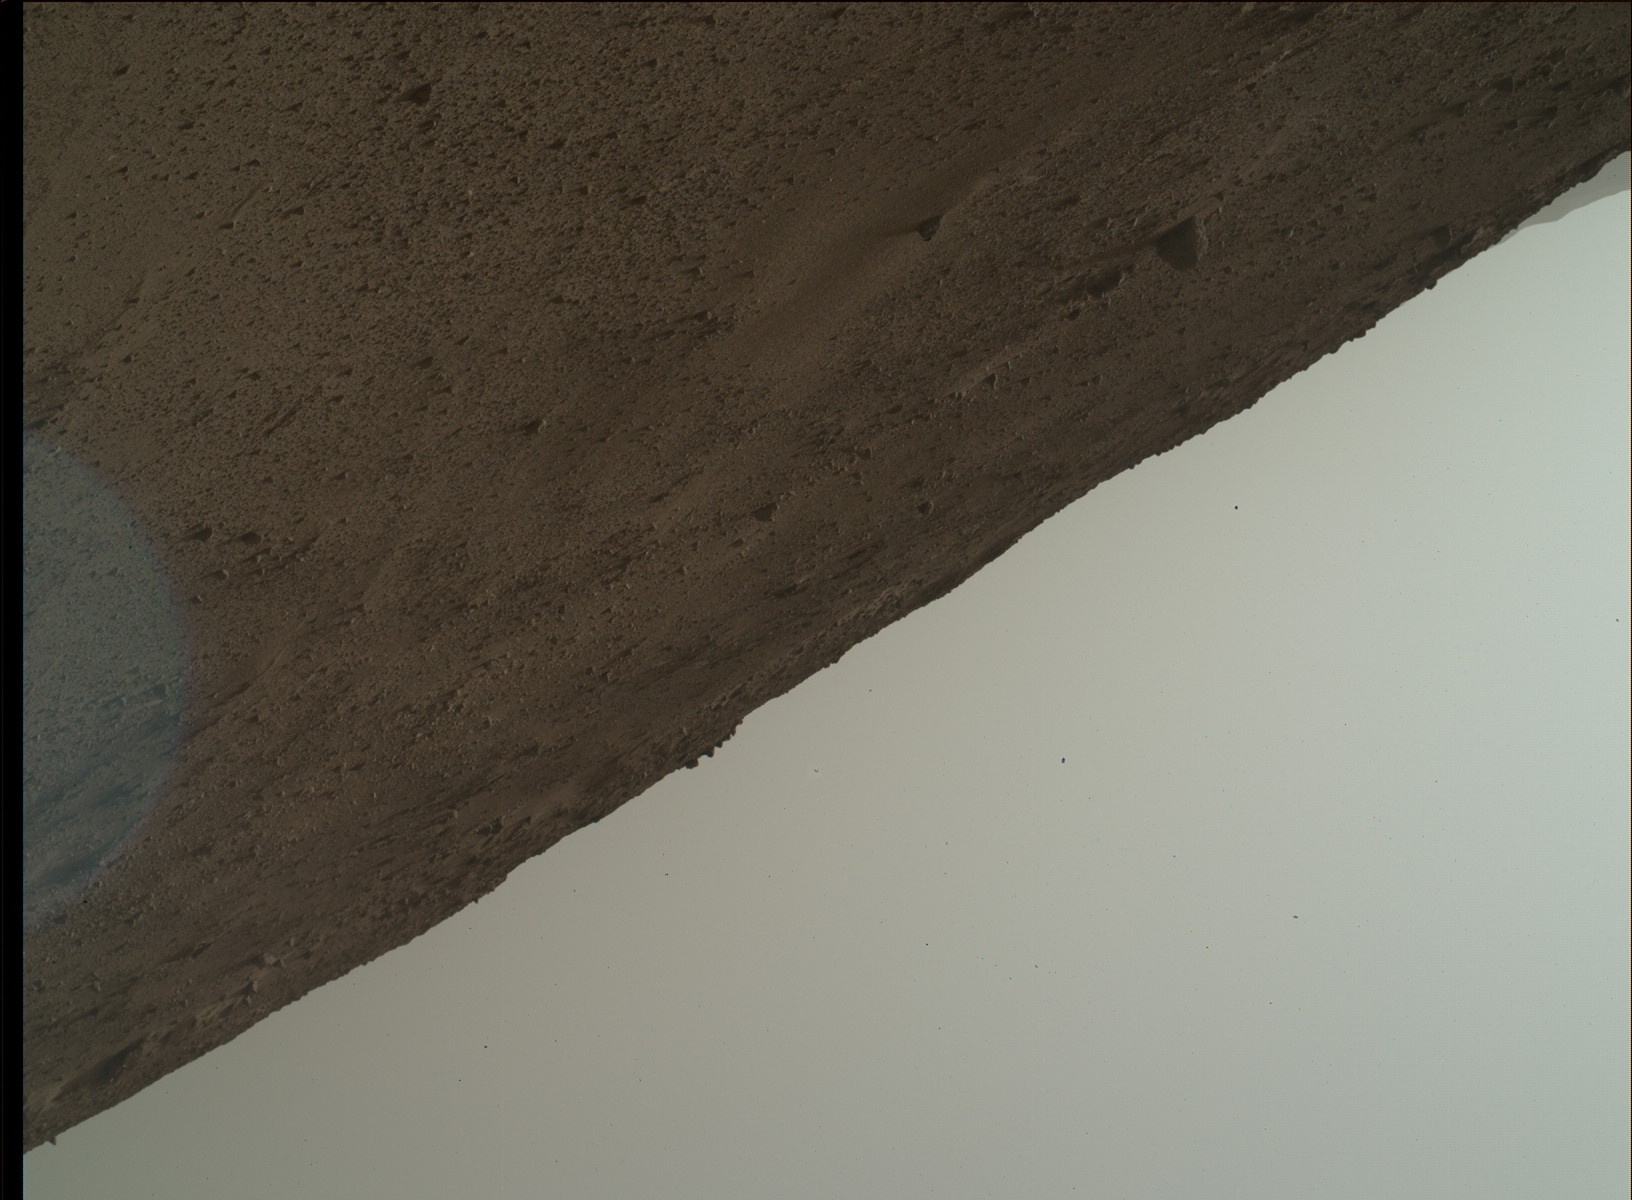 Nasa's Mars rover Curiosity acquired this image using its Mars Hand Lens Imager (MAHLI) on Sol 671